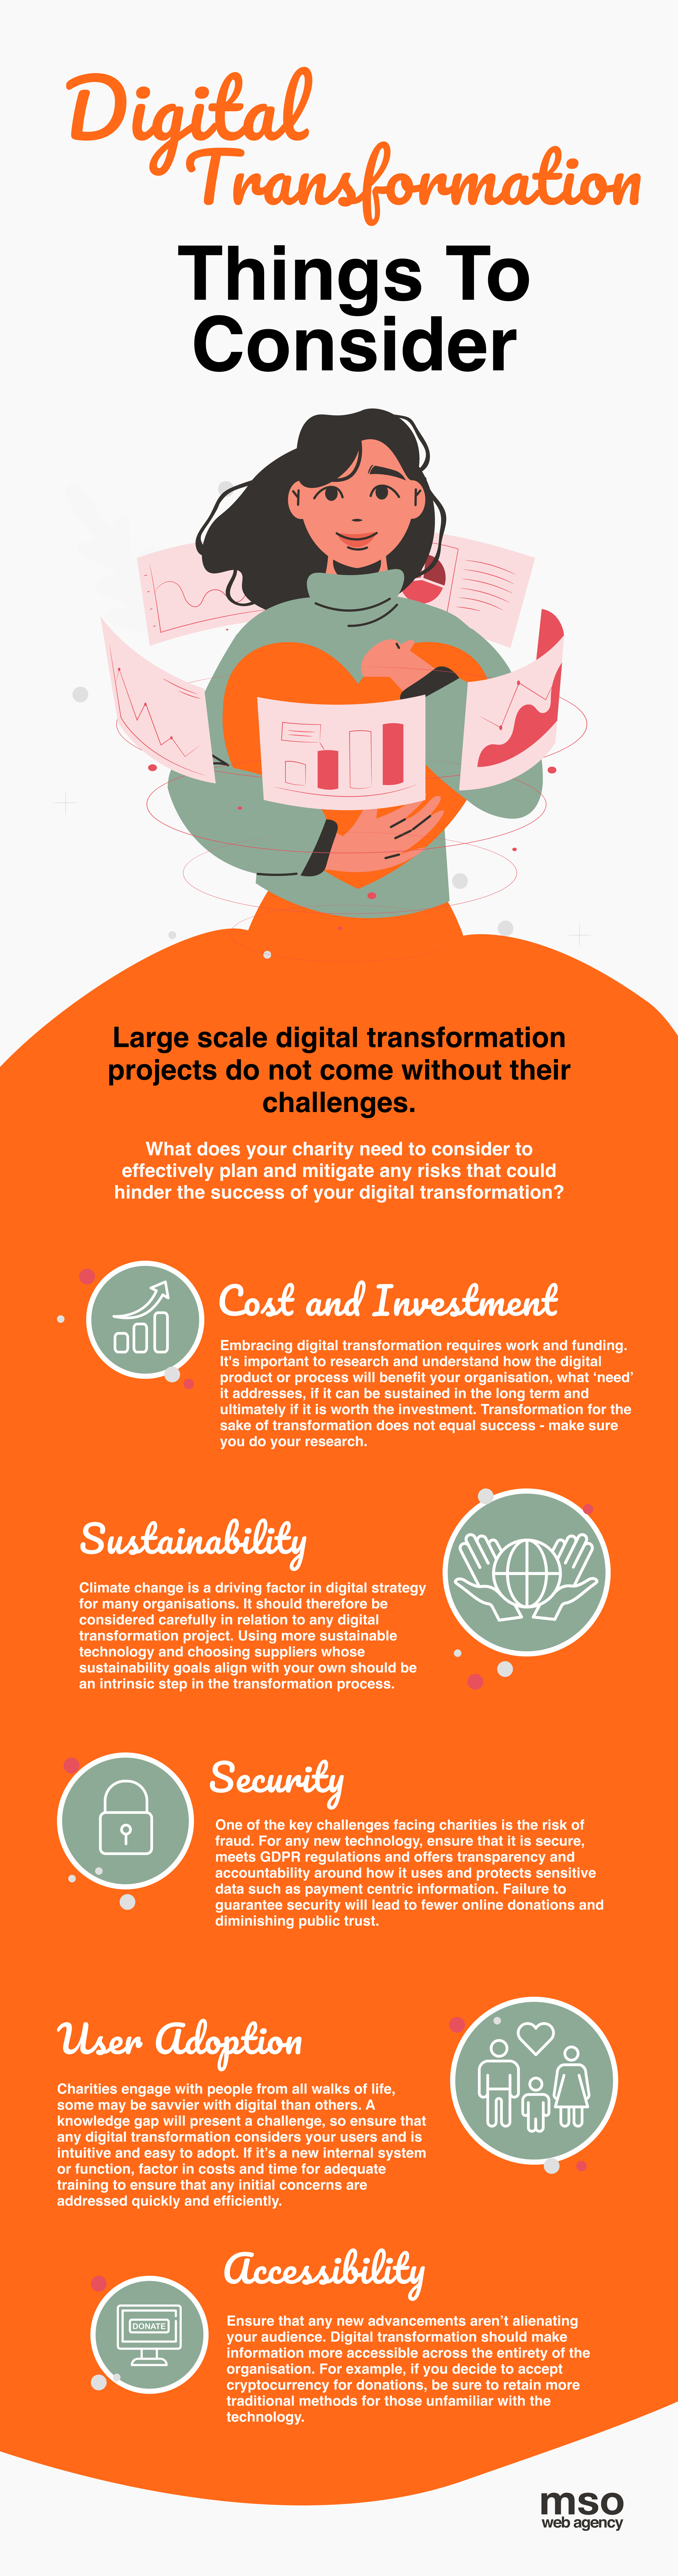 infographic titled Digital Transformation: Key considerations and potential risks which includes 5 points of considerations and potential risks to help charities to manage a digital transformation project